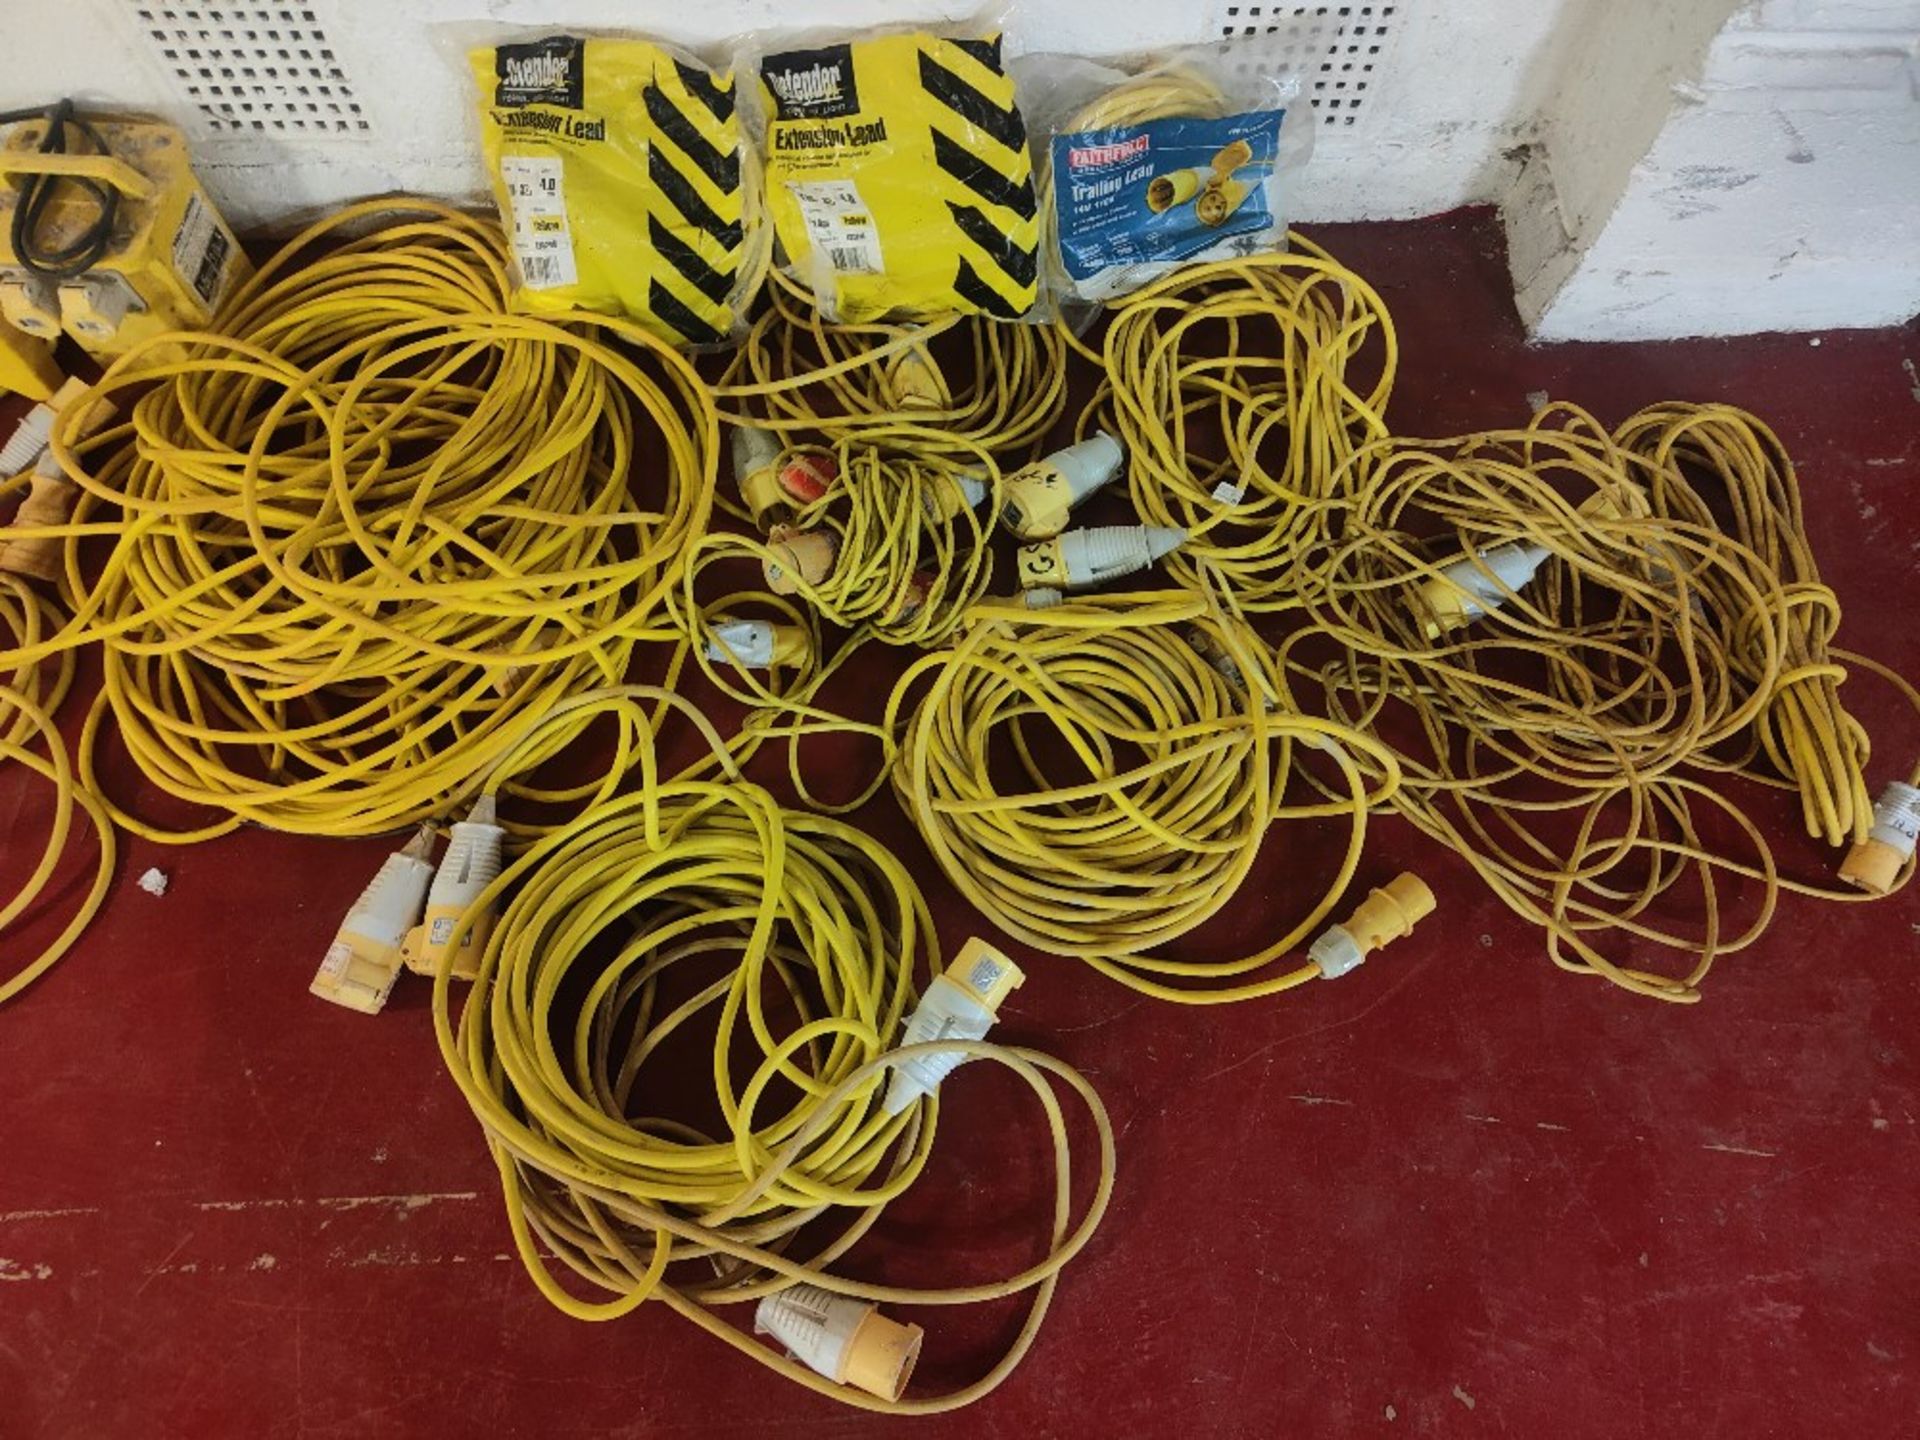 Quantity of 110V Electrical Cables and Splitters - Image 5 of 5